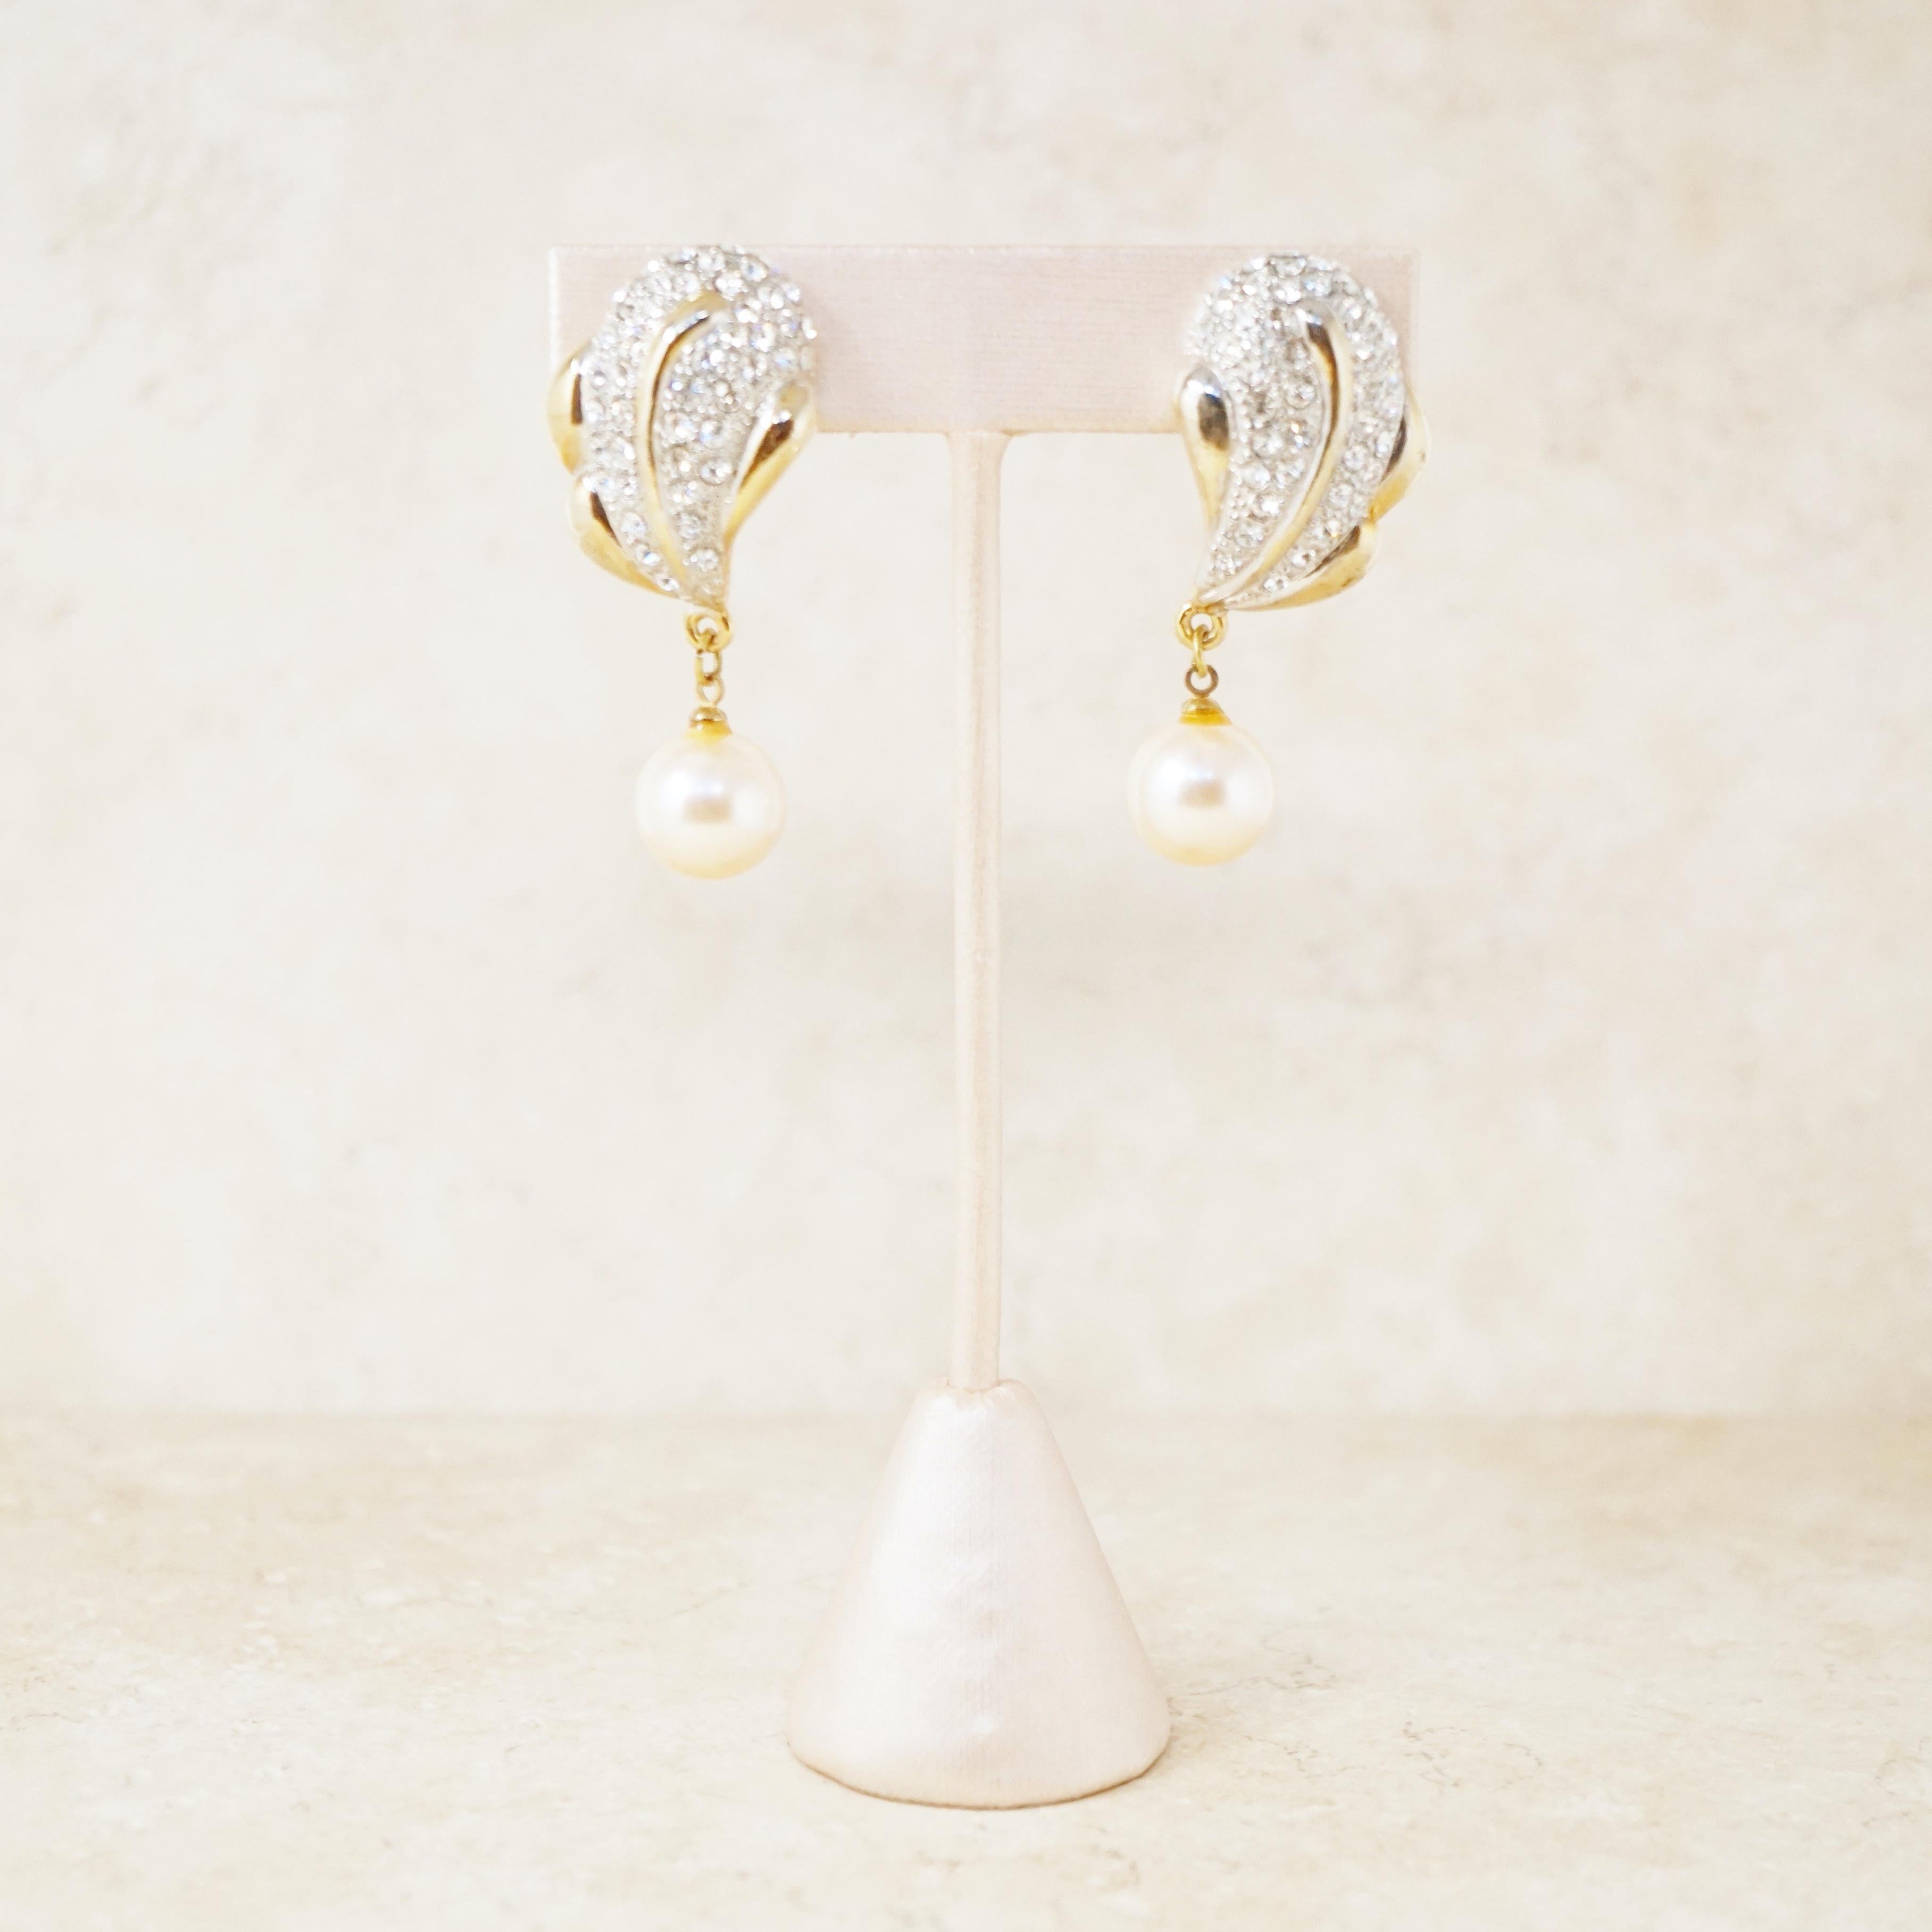 Vintage Gilded Crystal Pavé Statement Earrings with Drop Pearl, 1980s 2